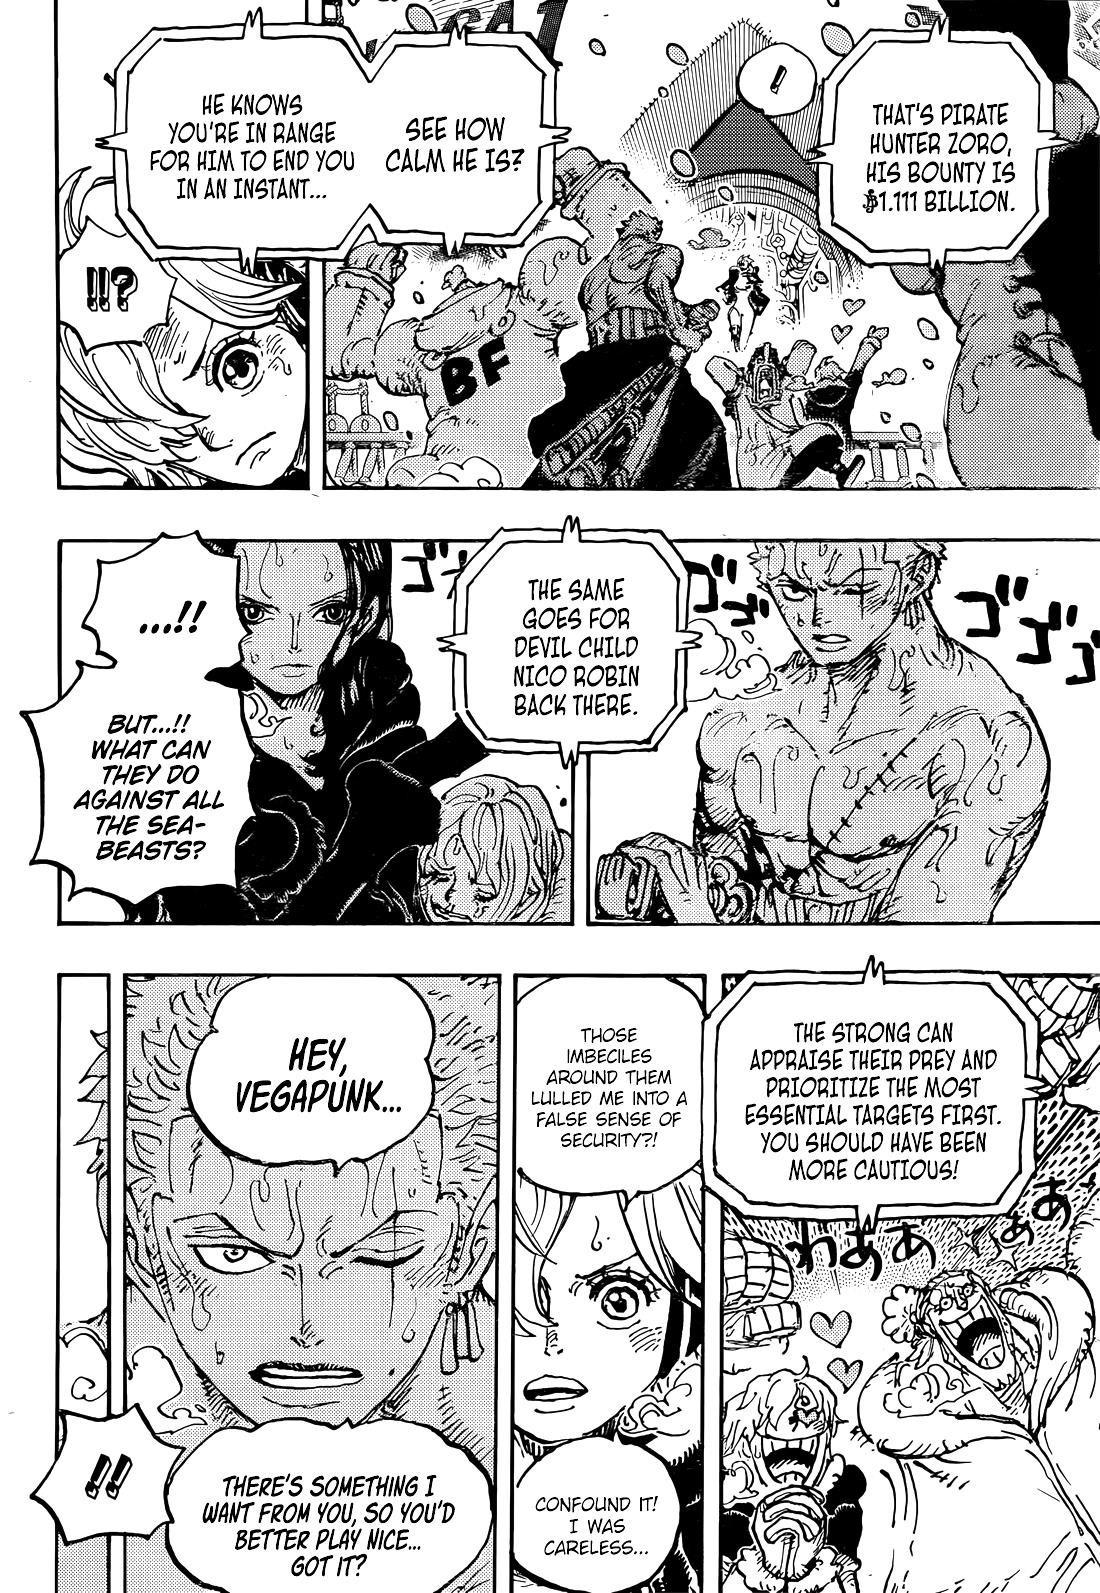 One Piece Chapter 1062 Spoilers & Brief Summary